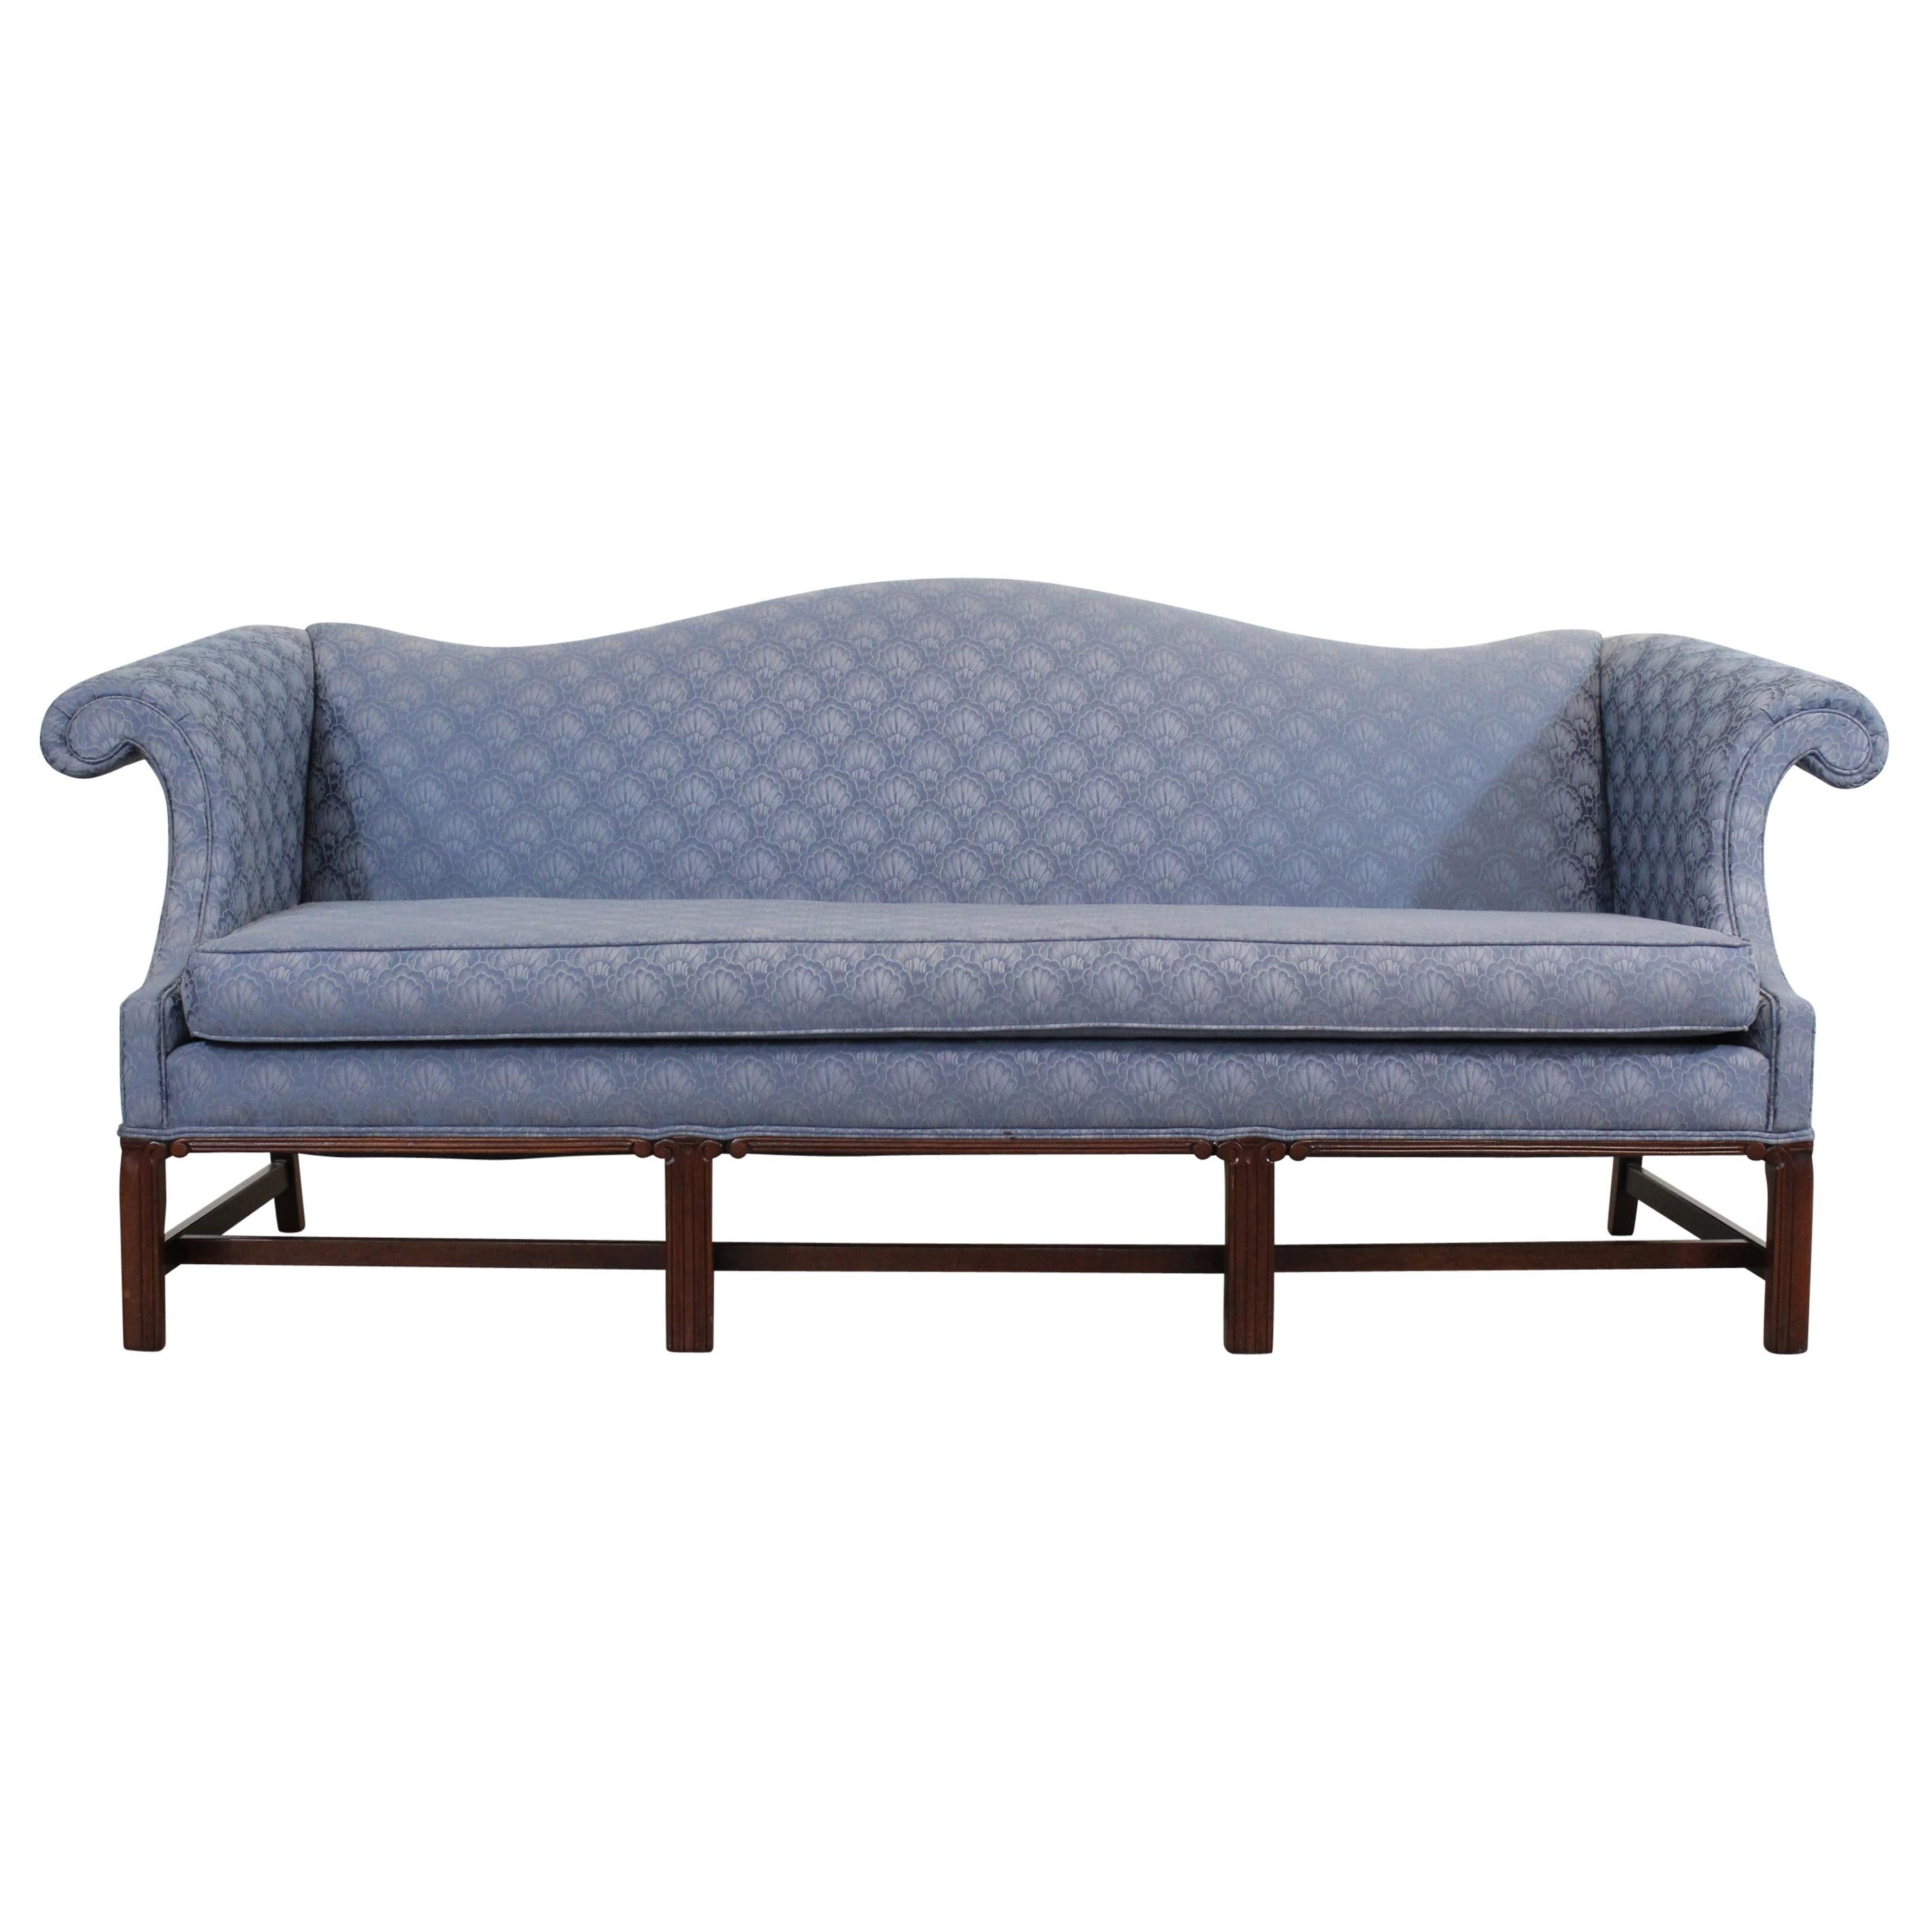 Colonial Chippendale Reproduction Camelback Sofa by Woodmark Inc